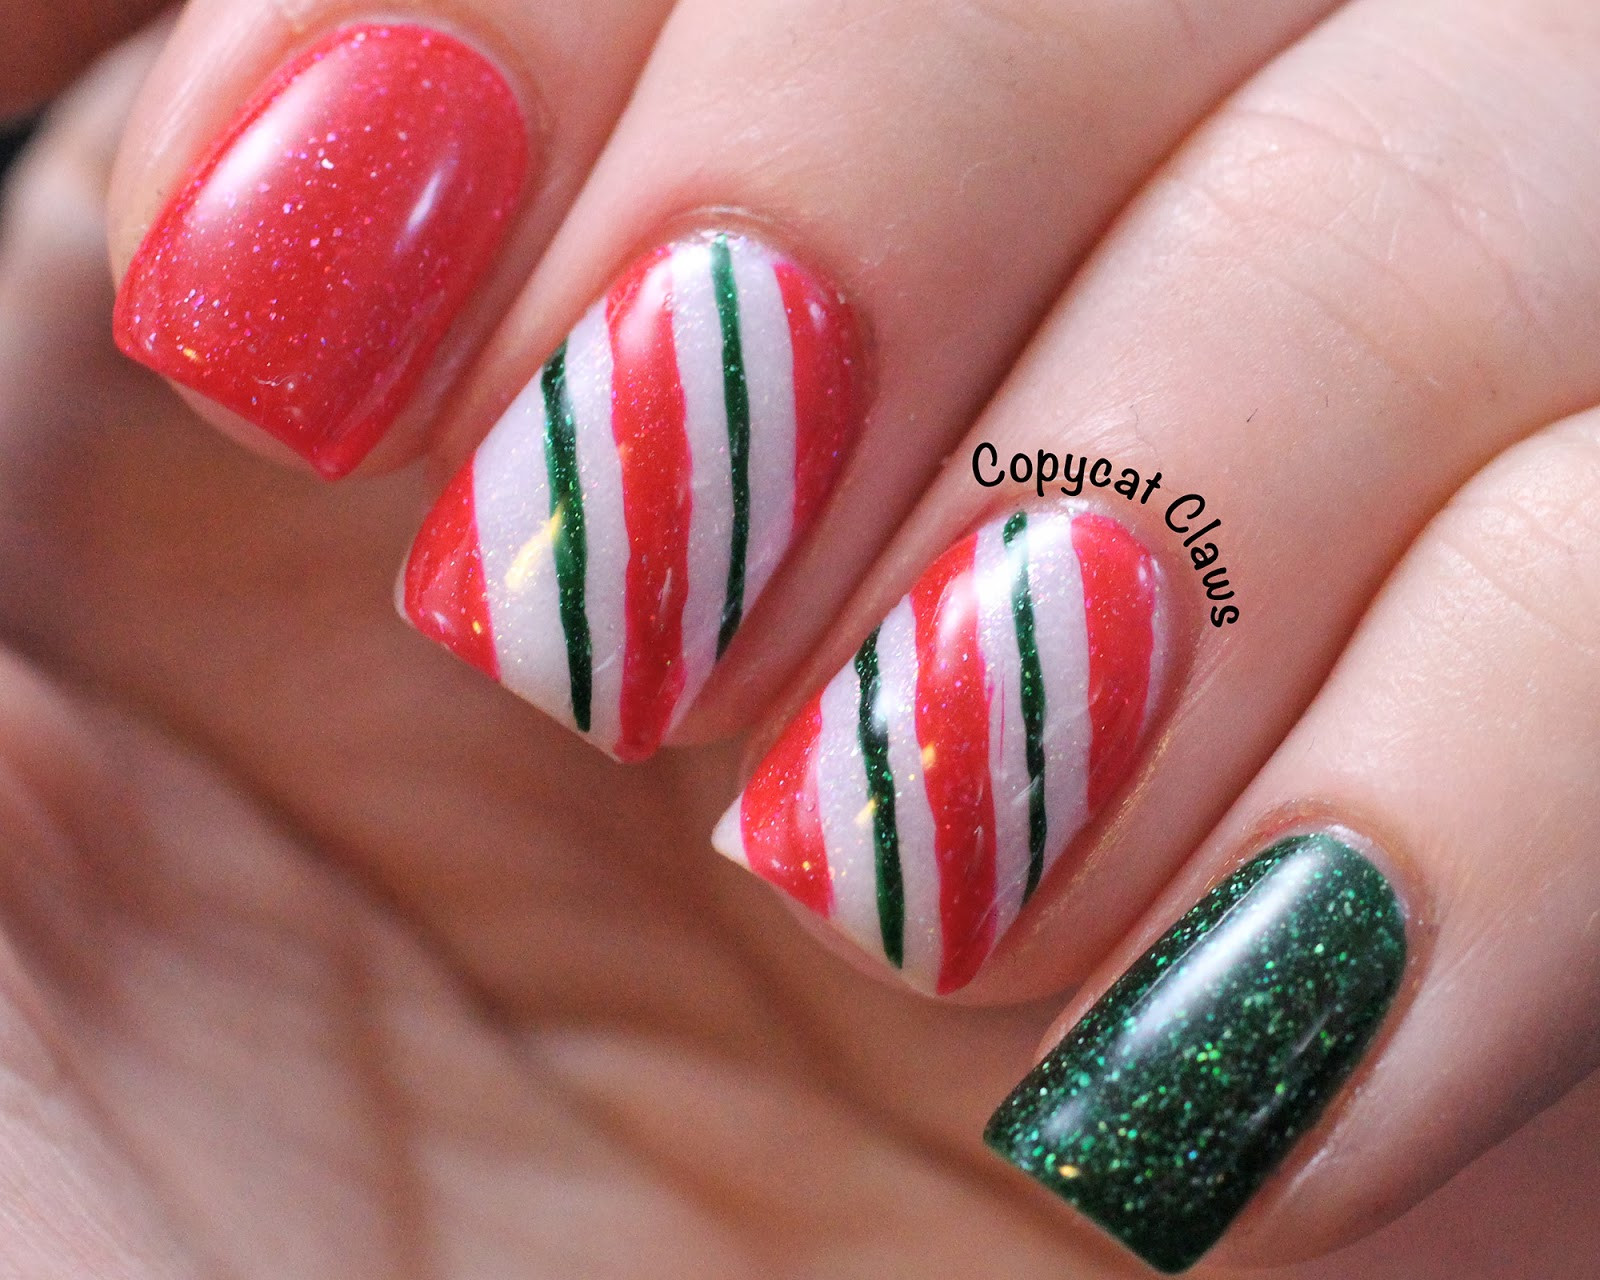 Candy Cane Nail Art
 Copycat Claws Picture Polish Candy Cane Nail Art